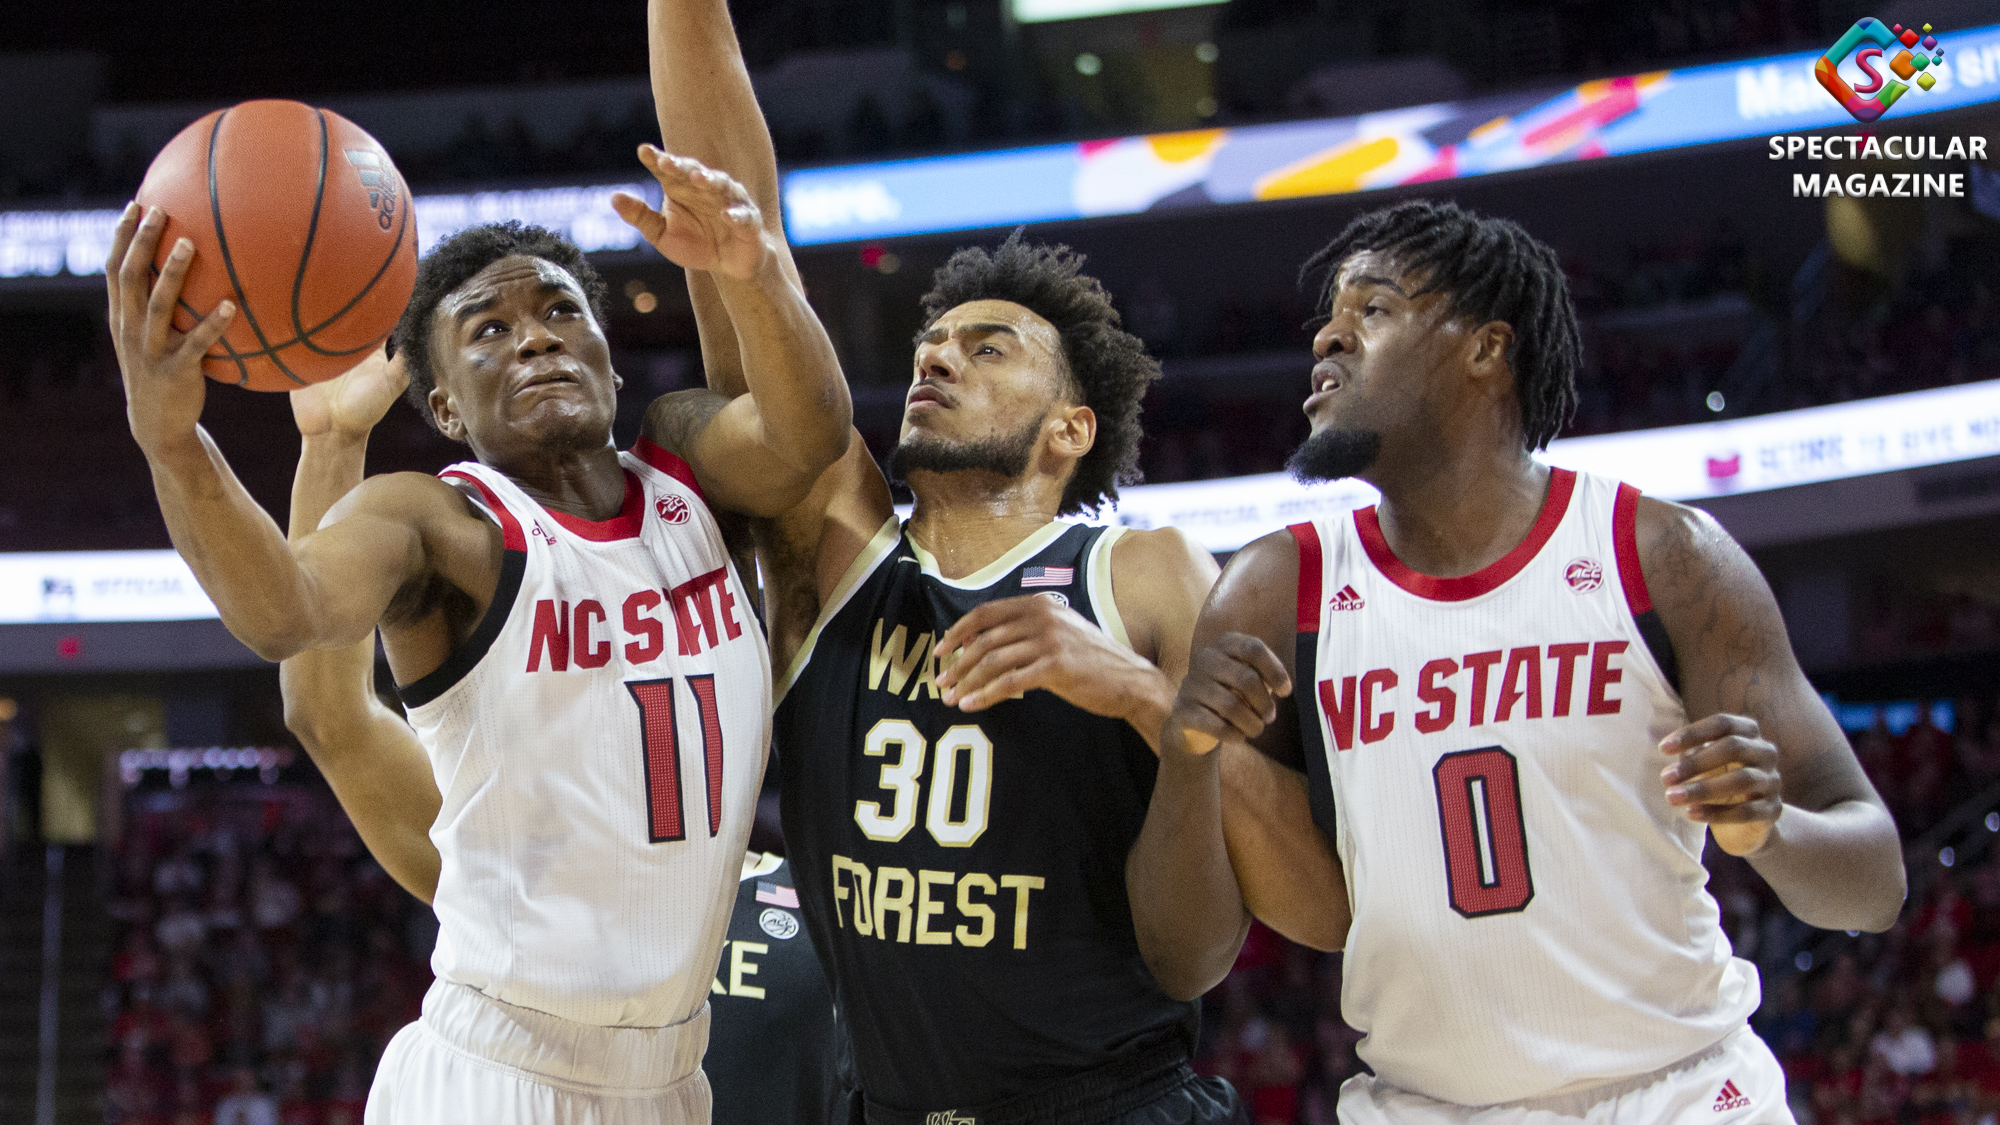 NC State senior guard Markell Johnson (left) attempts a layup against Wake Forest's Olivier Sarr (middle) on senior night at PNC Arena in Raleigh, N.C., Friday, Mar. 6, 2020. NCSU defeated WFU 84-64.